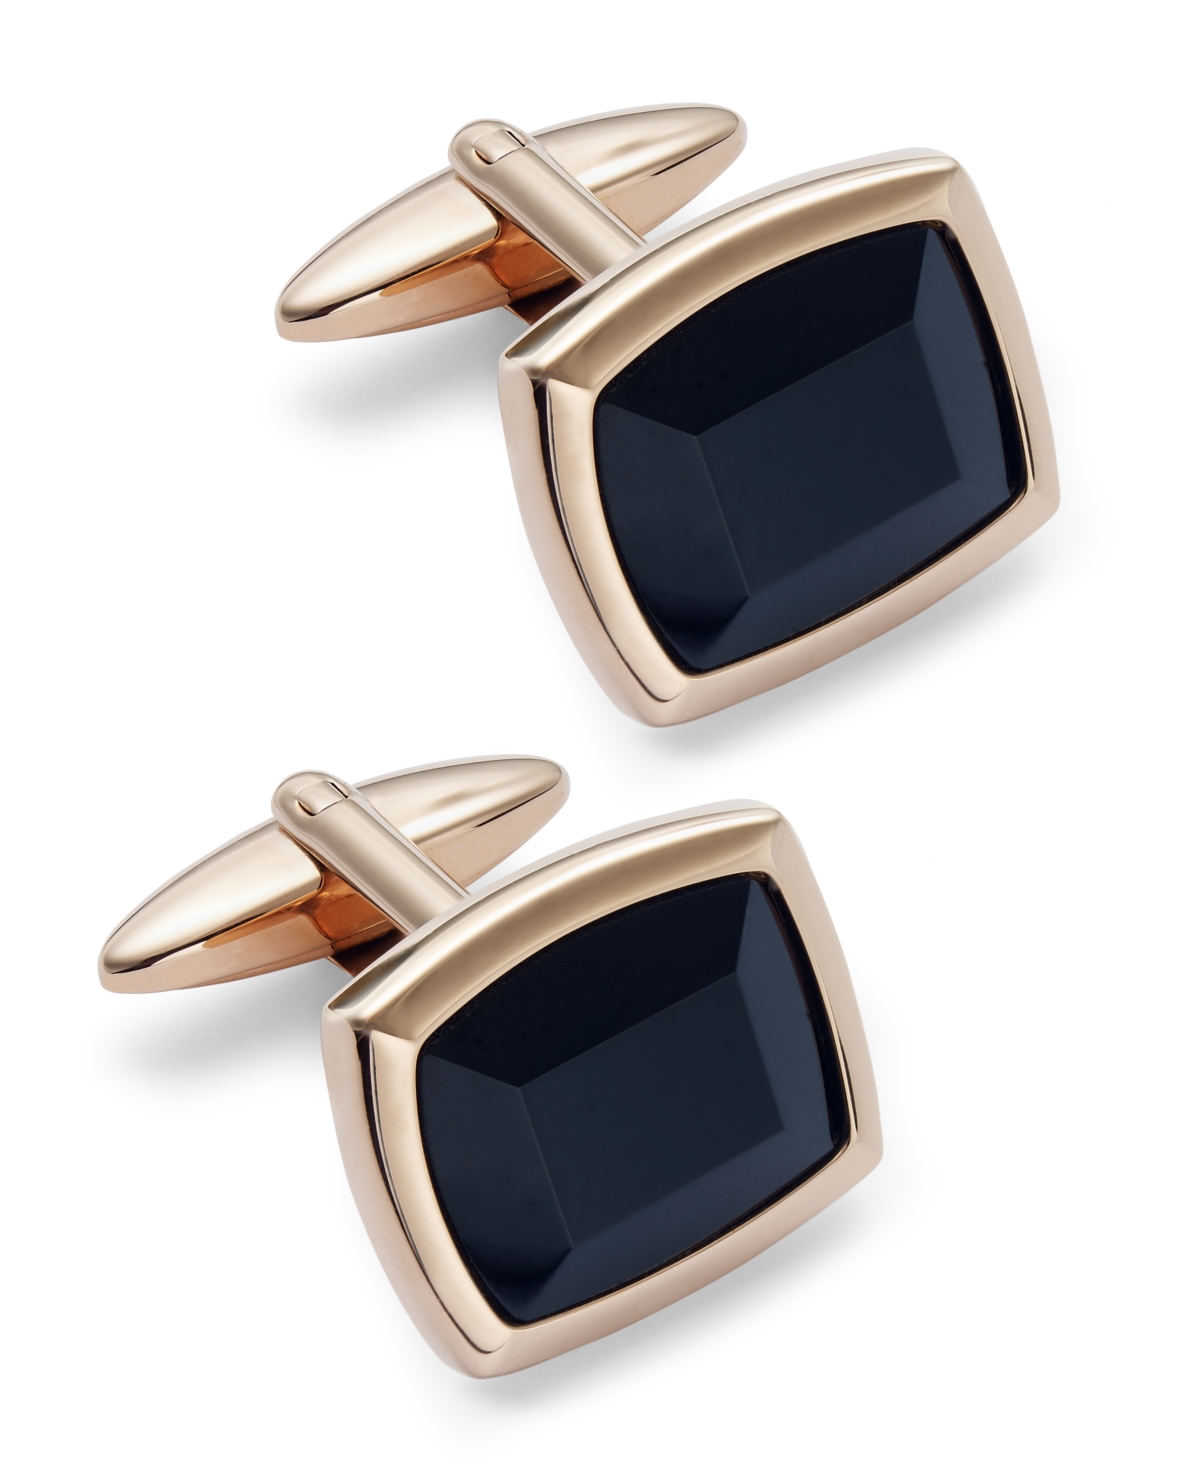 Sutton by Rhona Sutton Men's Rose Gold-Tone Stainless Steel and Jet Stone Cuff Links - Black